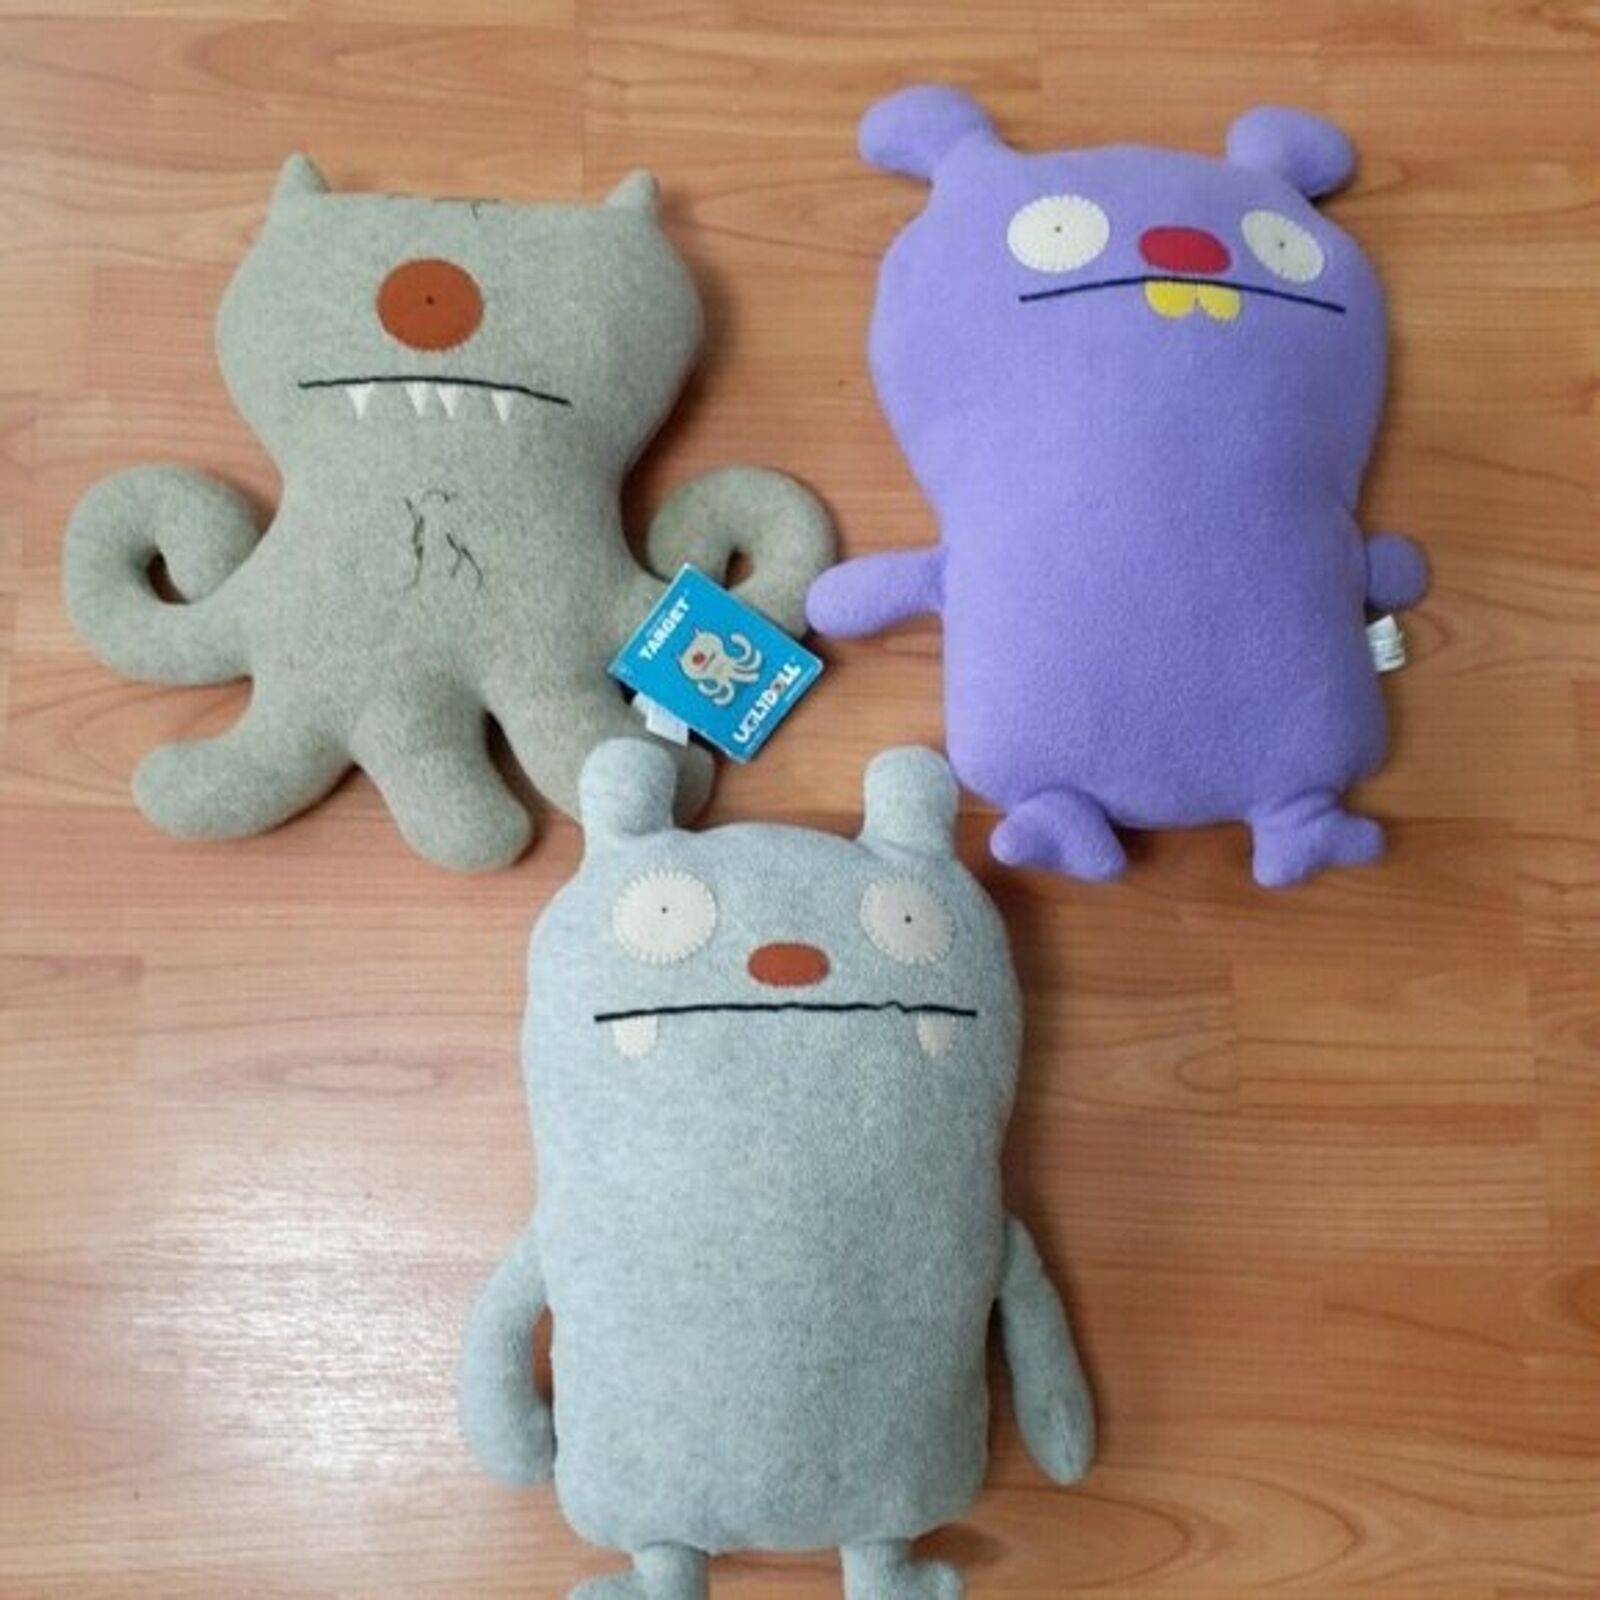 Ugly Doll Lot Of 3 Trunko & Target Plush Stuffed Animal Soft Toy